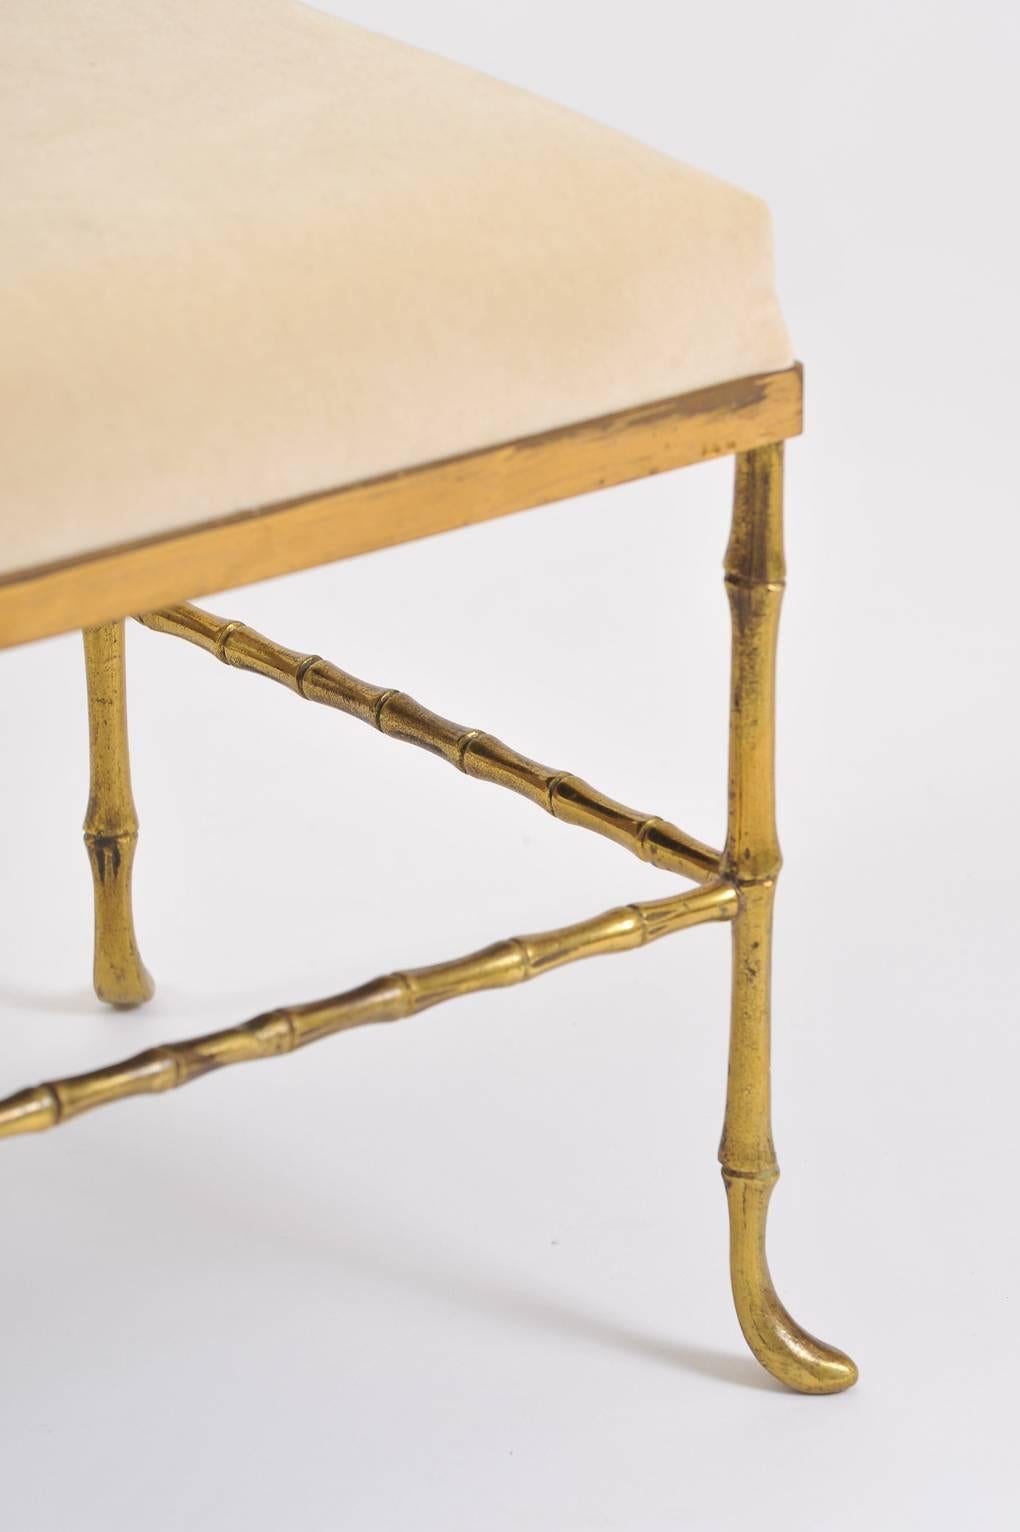 20th Century Brass Bamboo Stool, Possibly by Maison Bagues